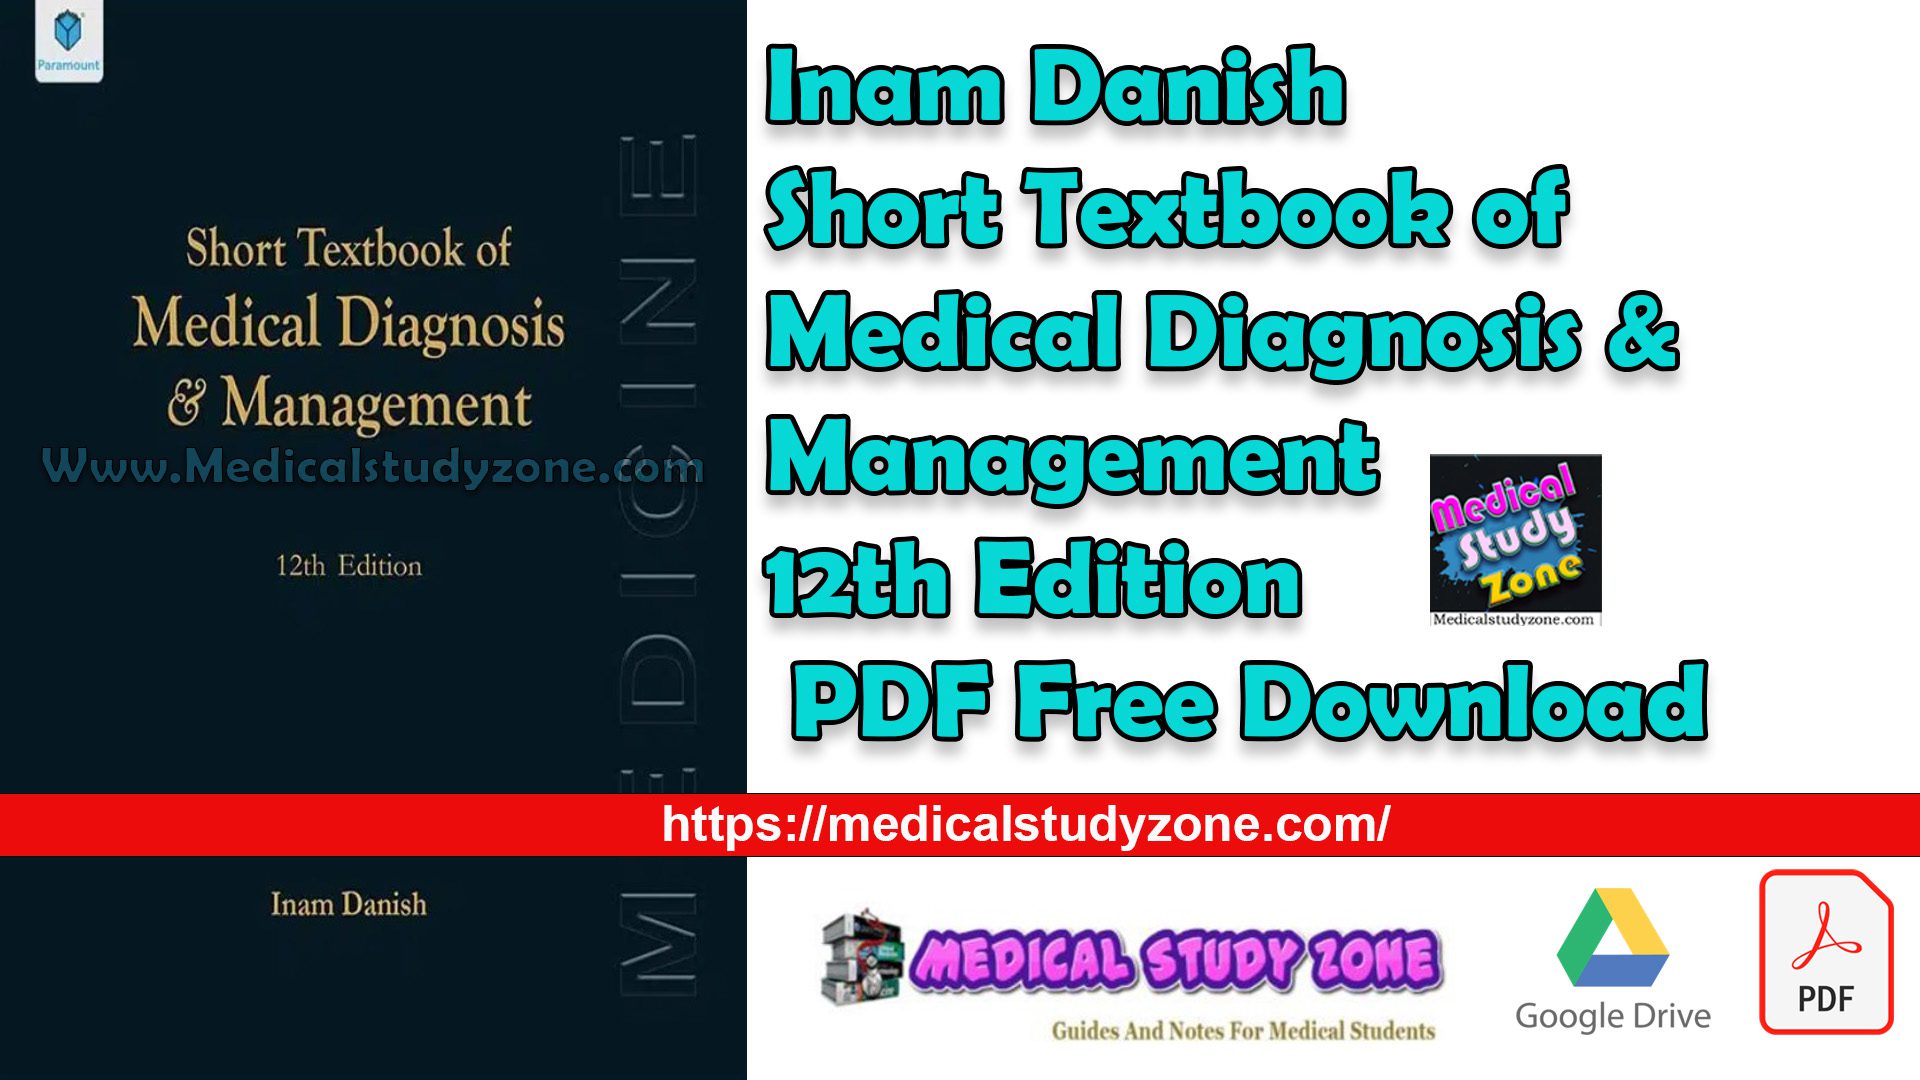 Inam Danish Short Textbook of Medical Diagnosis & Management 12th Edition PDF Free Download